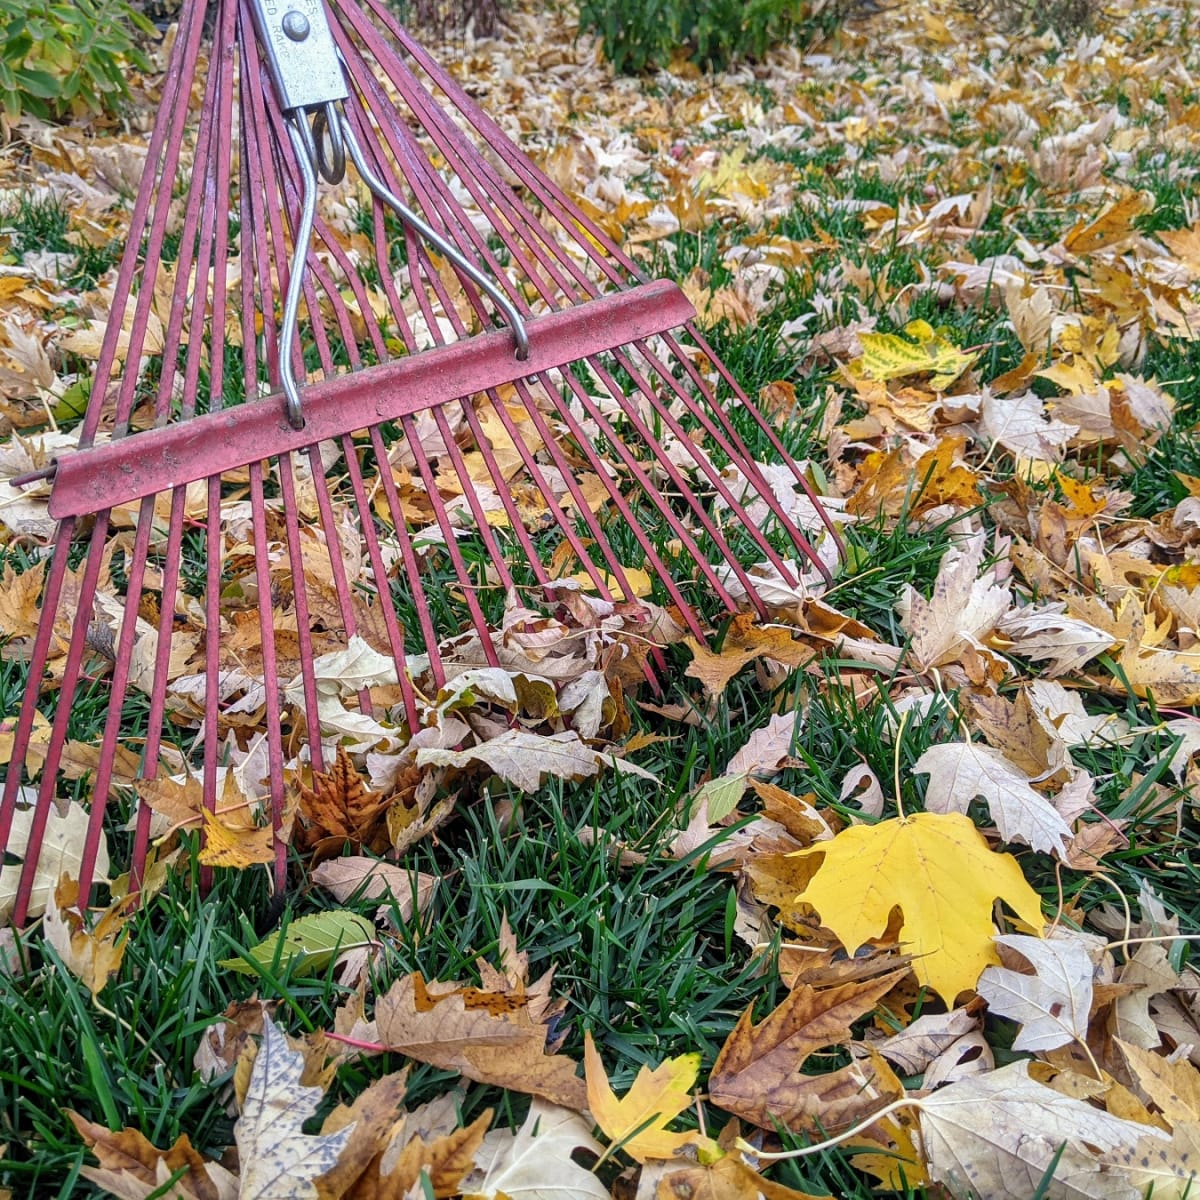 Rake the Leaves? Some Towns Say Mow Them - The New York Times